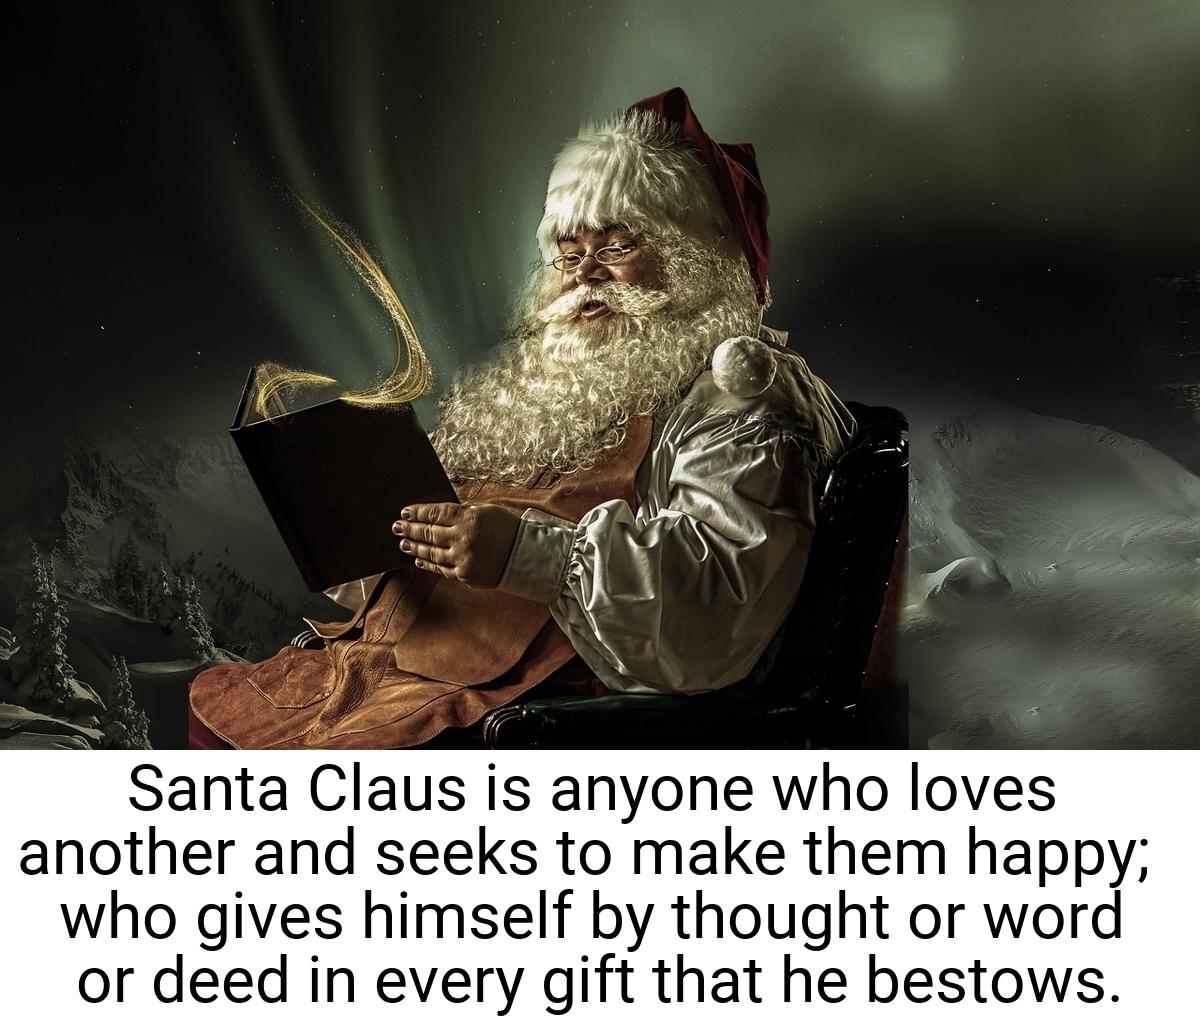 Santa Claus is anyone who loves another and seeks to make